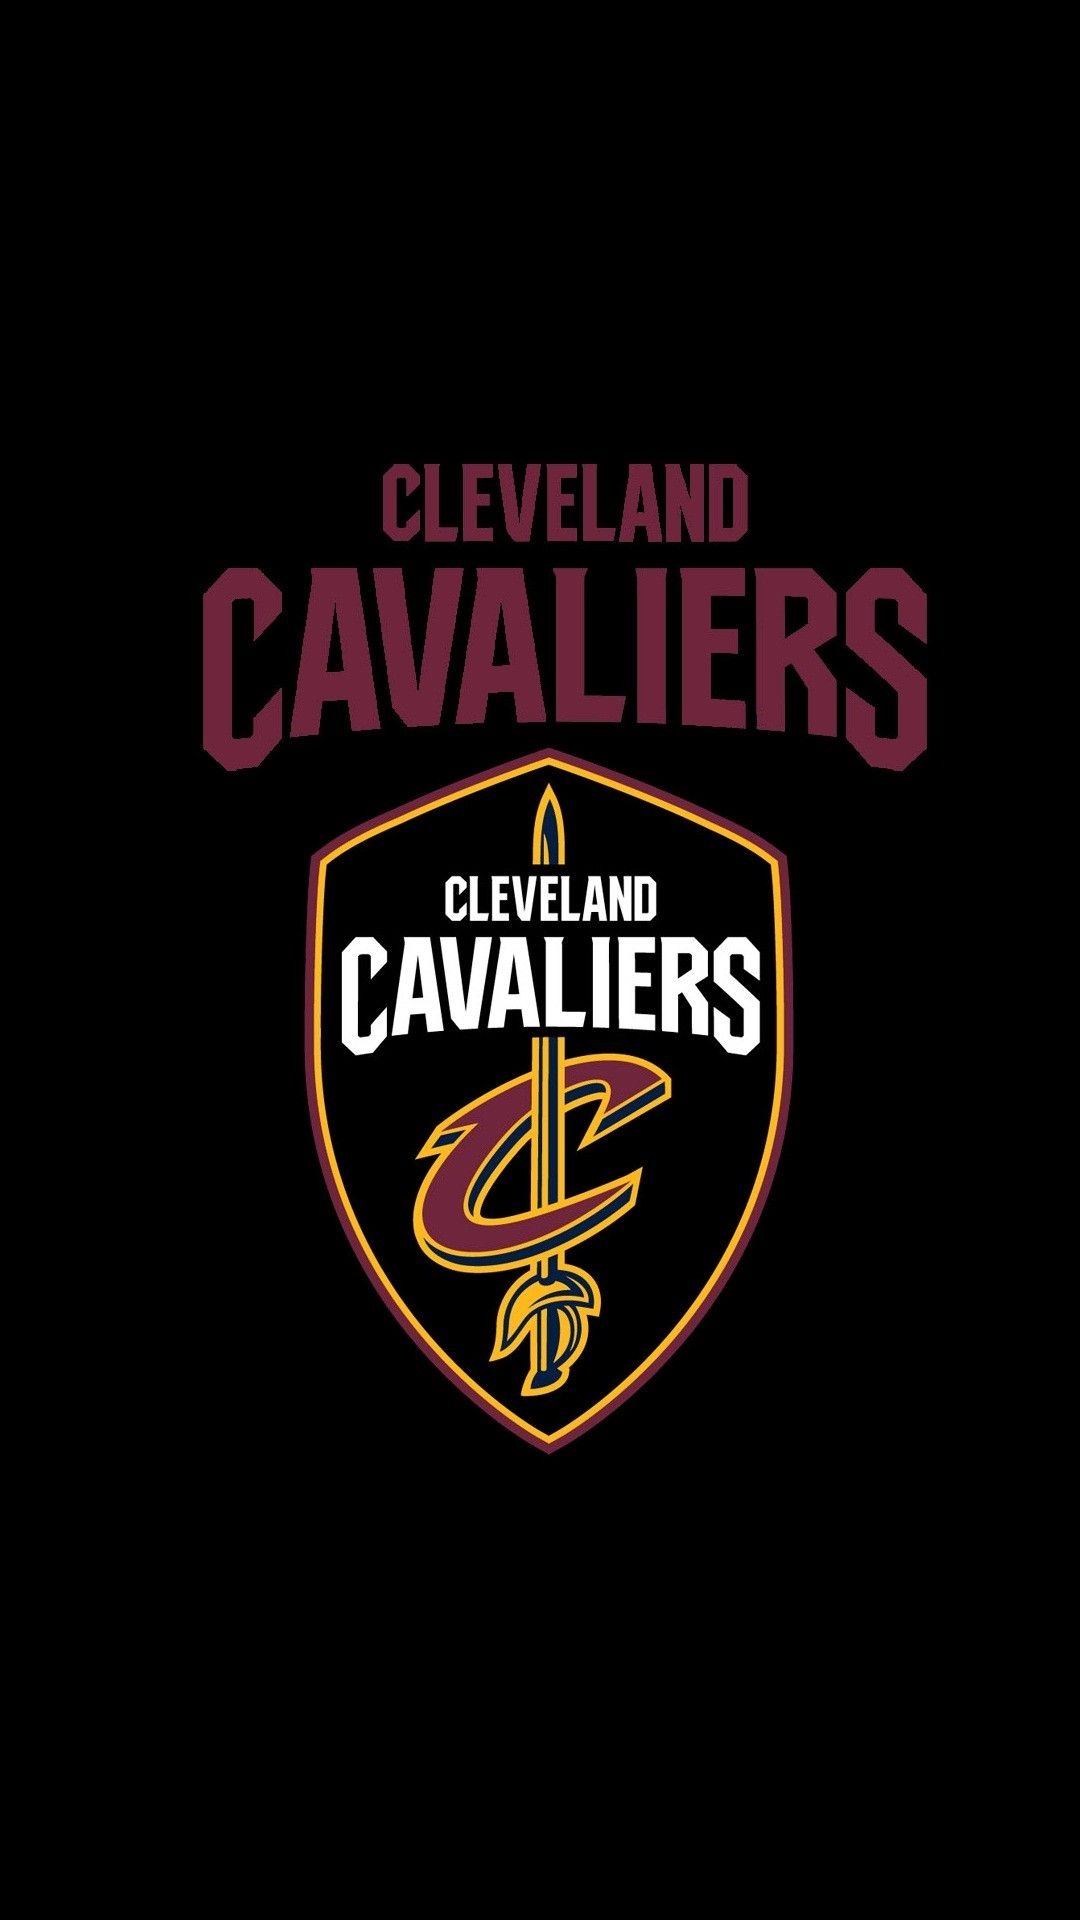 Cleveland Cavaliers: The Lebron-led team made four consecutive NBA Finals appearances from 2015 to 2018. 1080x1920 Full HD Wallpaper.